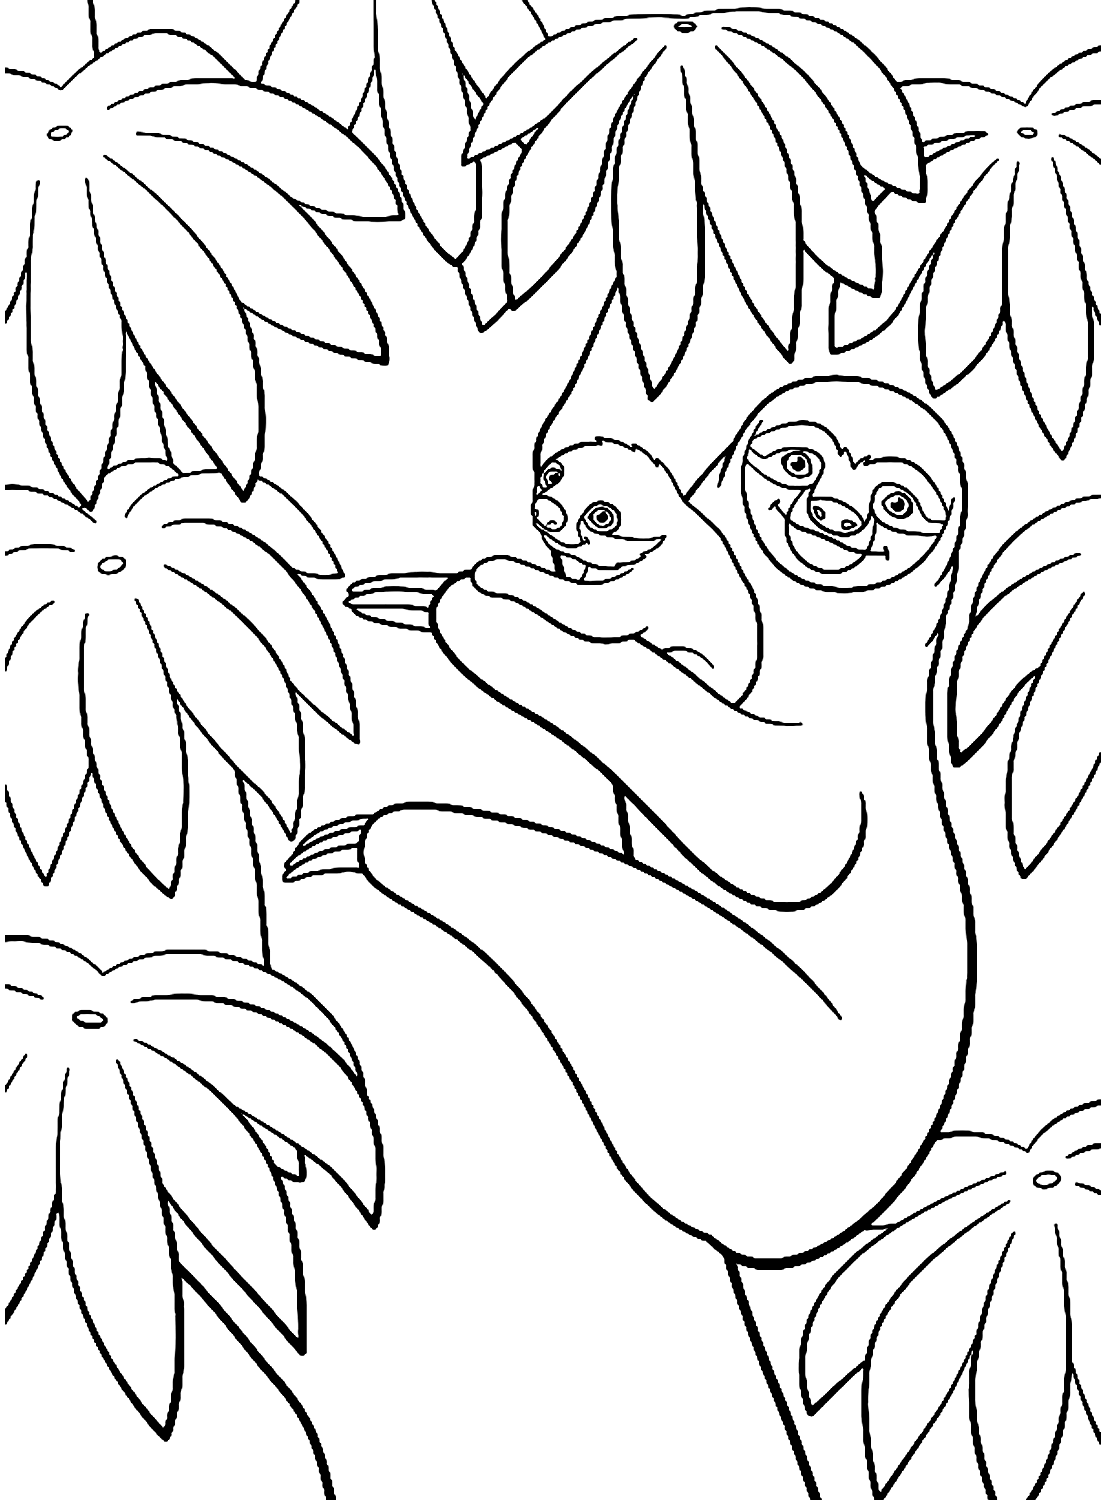 Baby with Mother Sloth Coloring Page